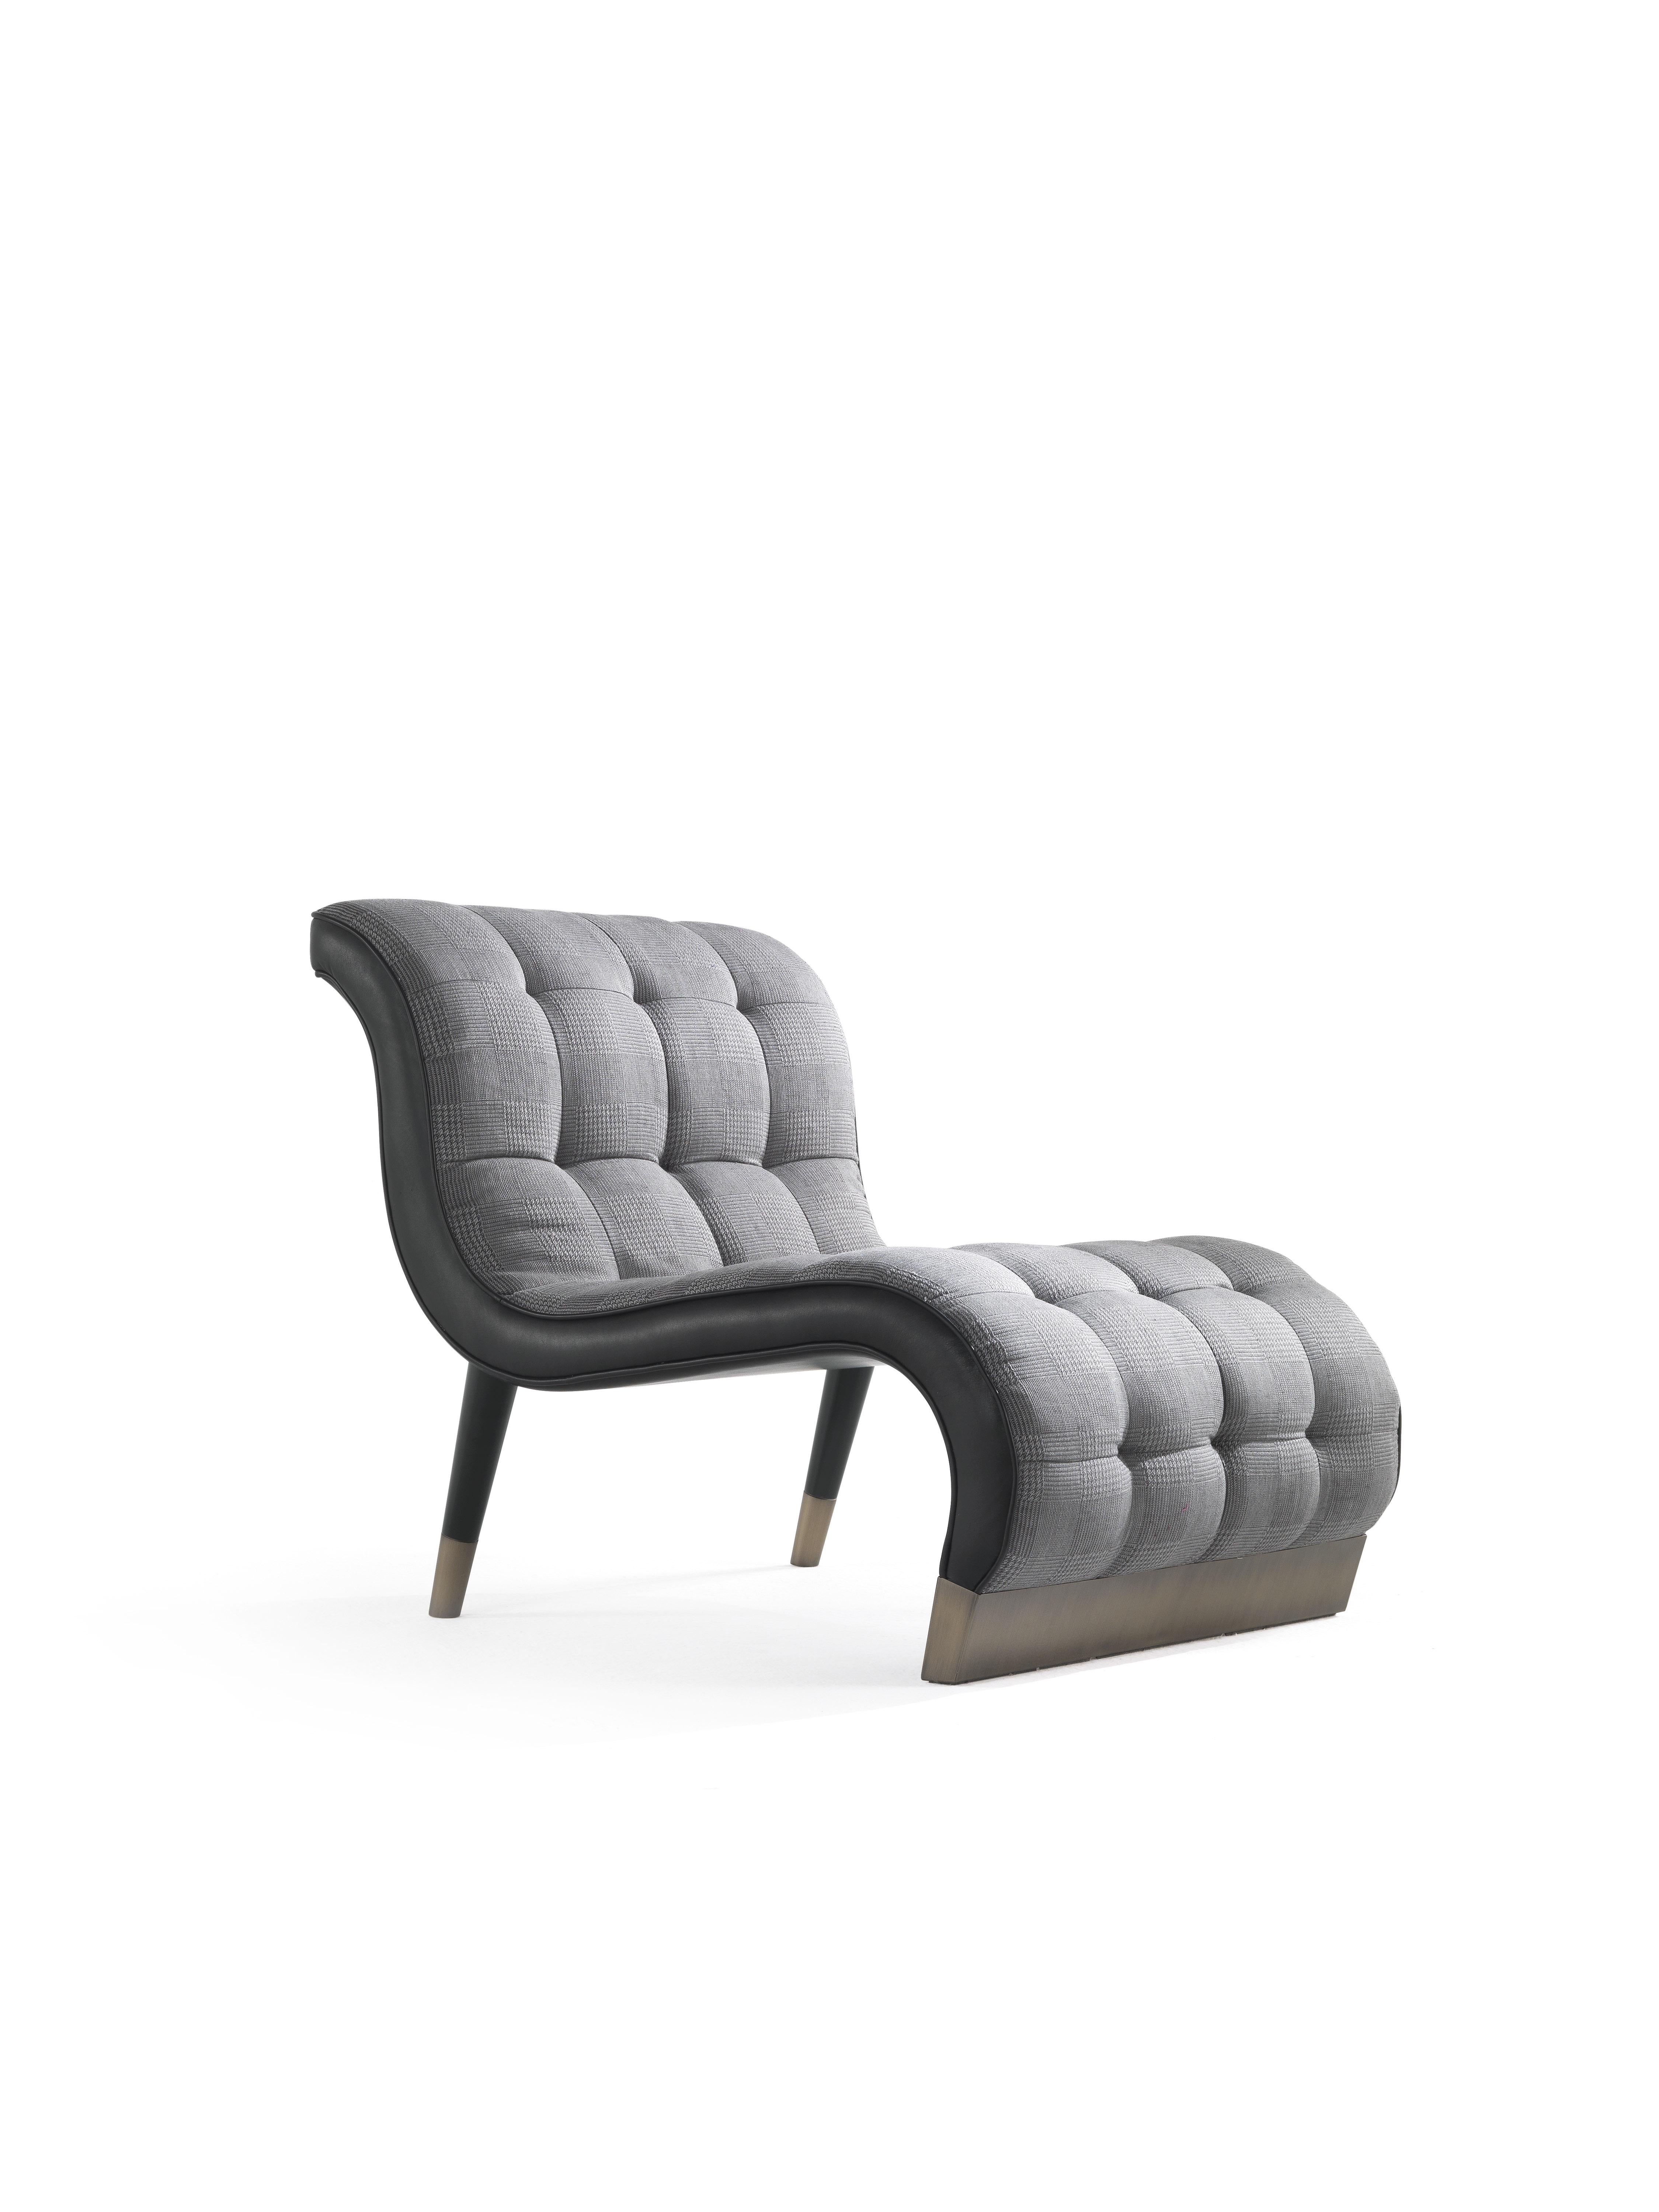 An original and comfortable shape for Bonnie: halfway between an armchair and a chaise longue, it is characterized by the backrest that continues on the seat and on the lower part, replacing the legs in the front. The oblique rear legs with bronzed